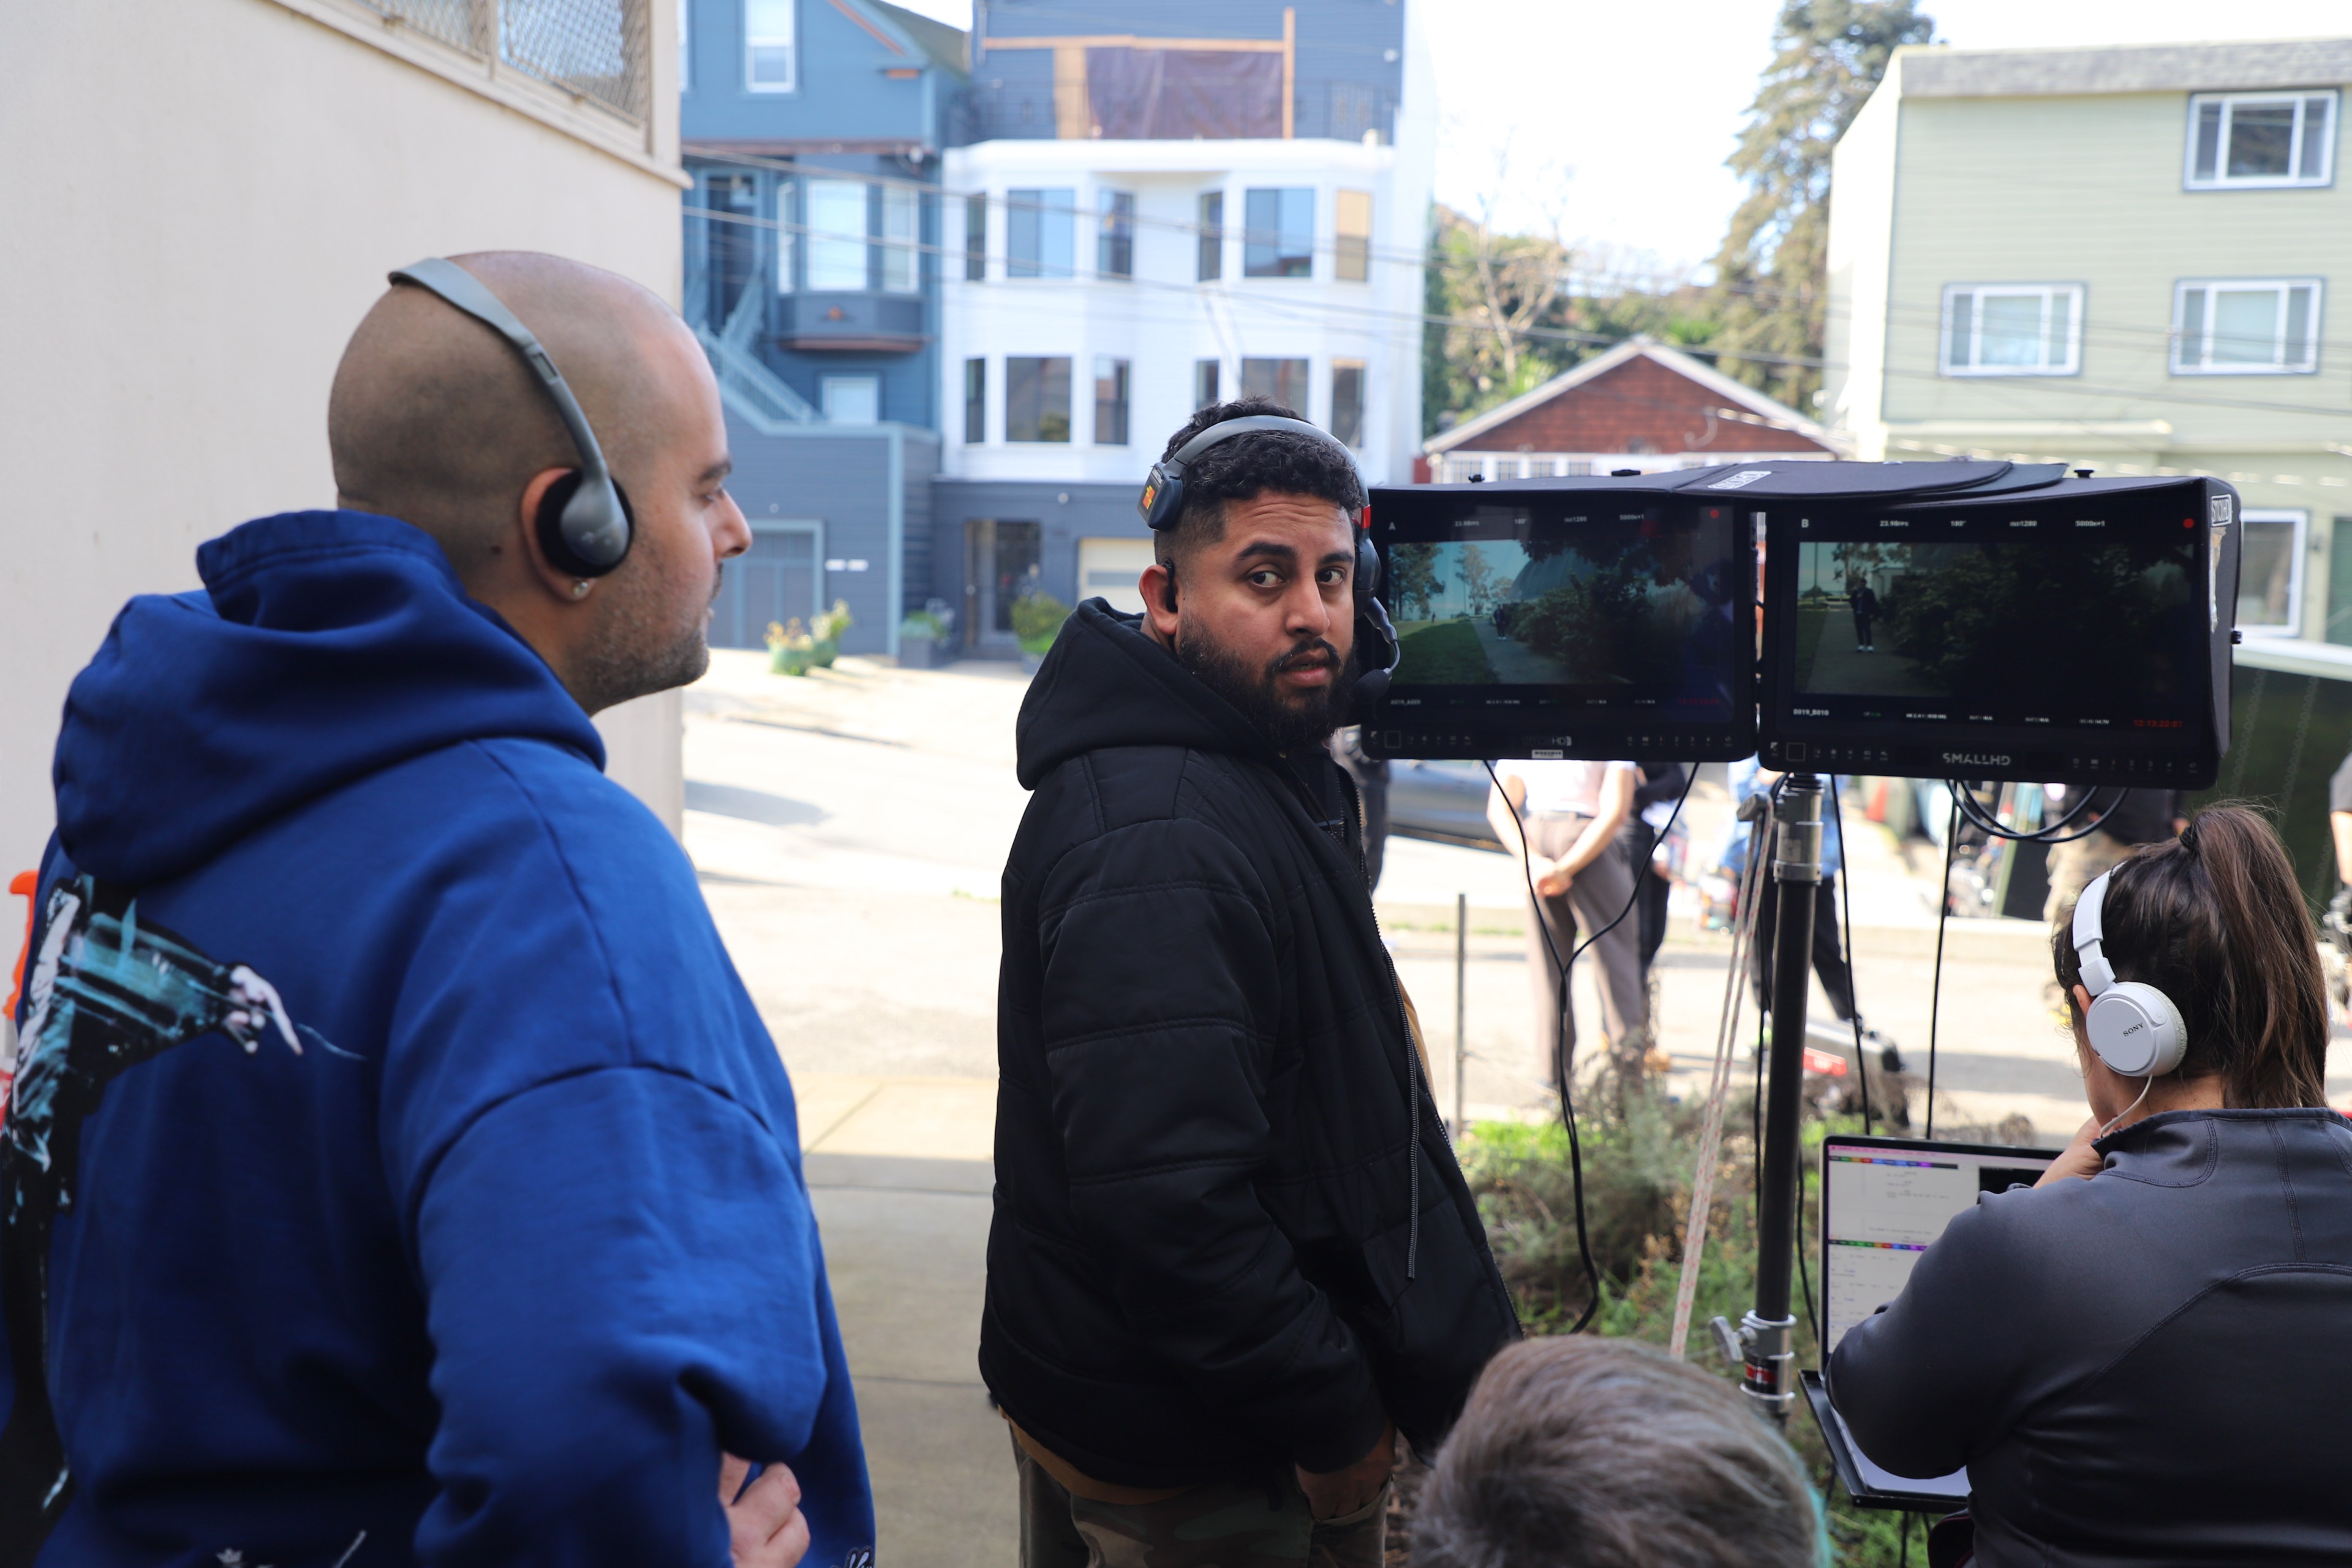 Three people in headphones monitor film production on dual screens with a residential backdrop.